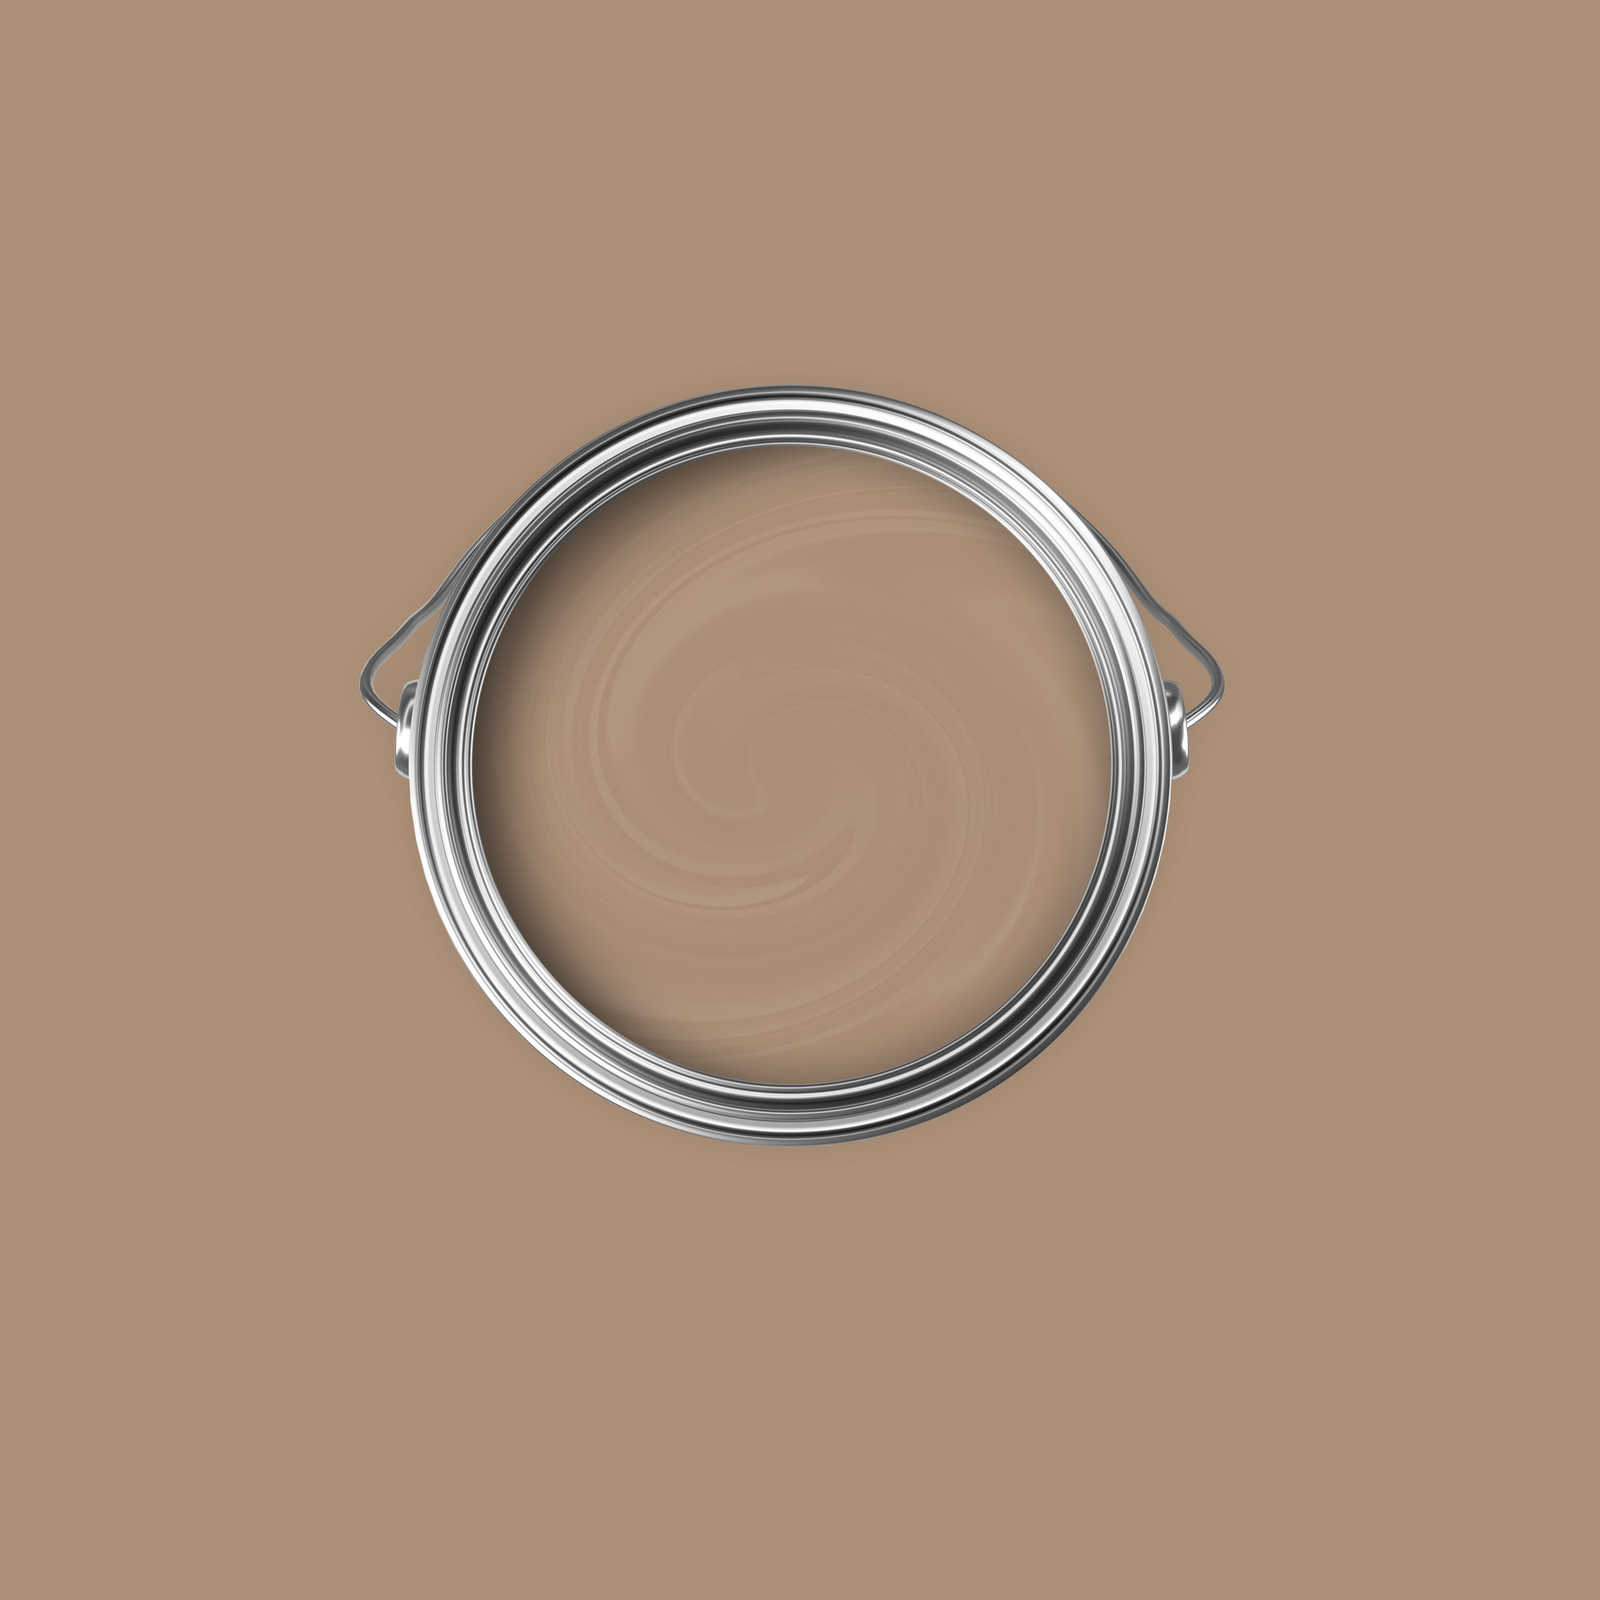             Premium Wall Paint Earthy Light Brown »Modern Mud« NW718 – 2.5 litre
        